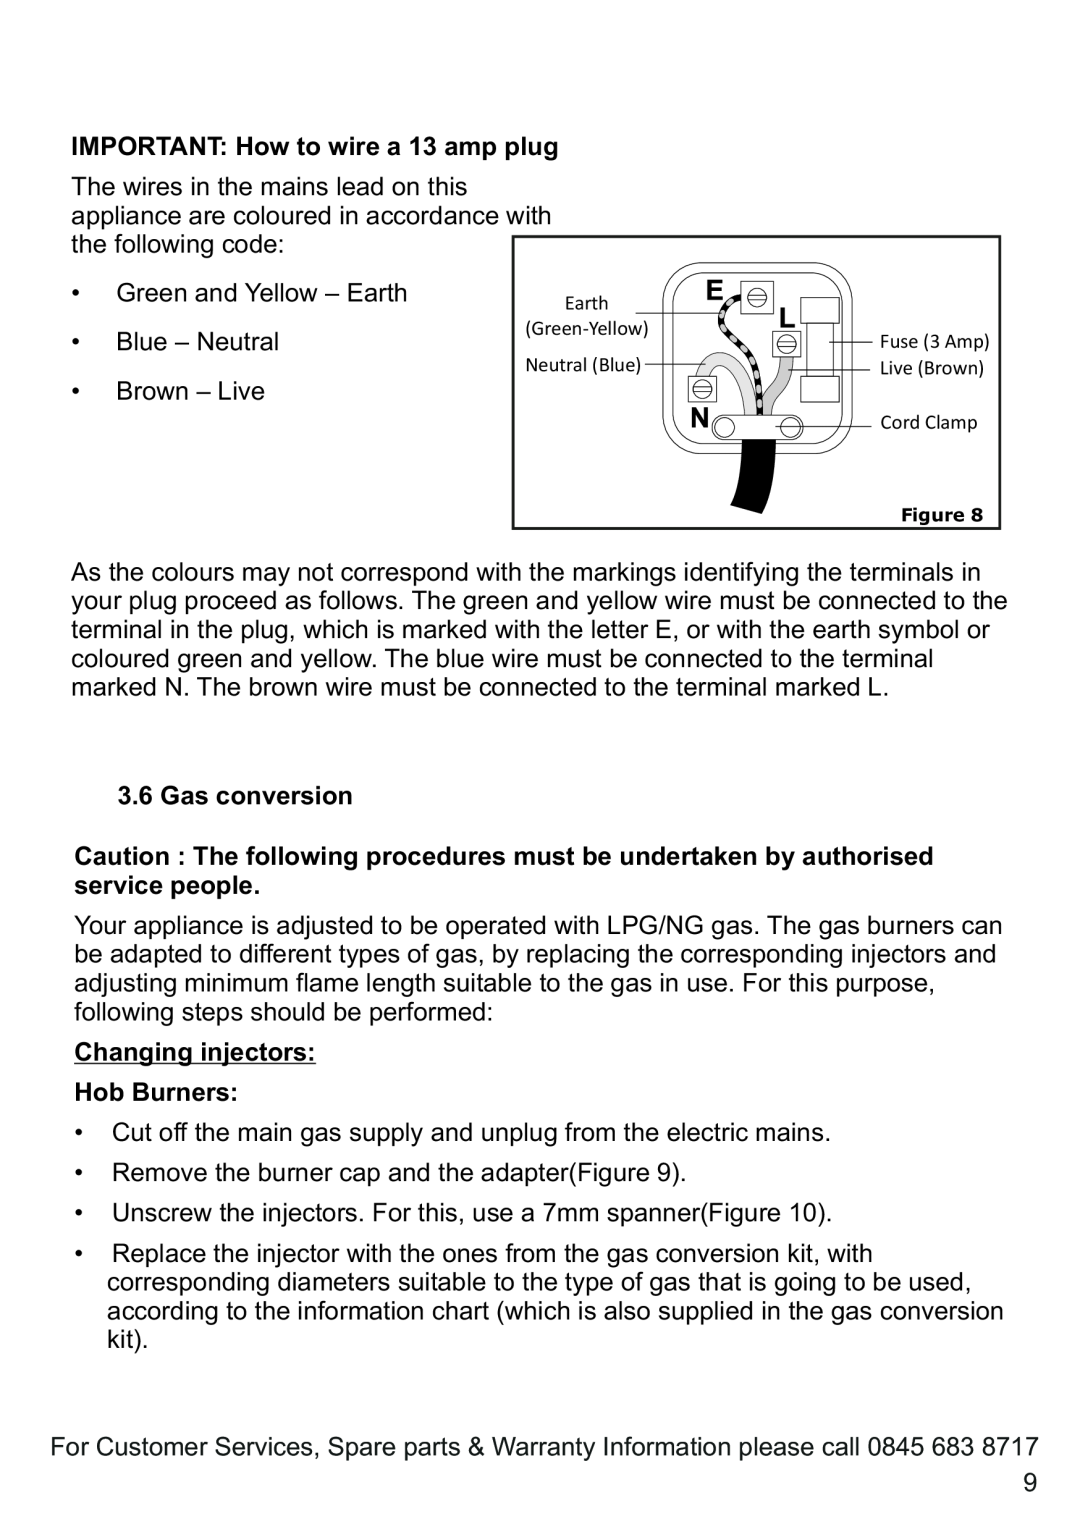 Russell Hobbs RHGC1 instruction manual IMPORTANT How to wire a 13 amp plug, Gas conversion, Changing injectors Hob Burners 